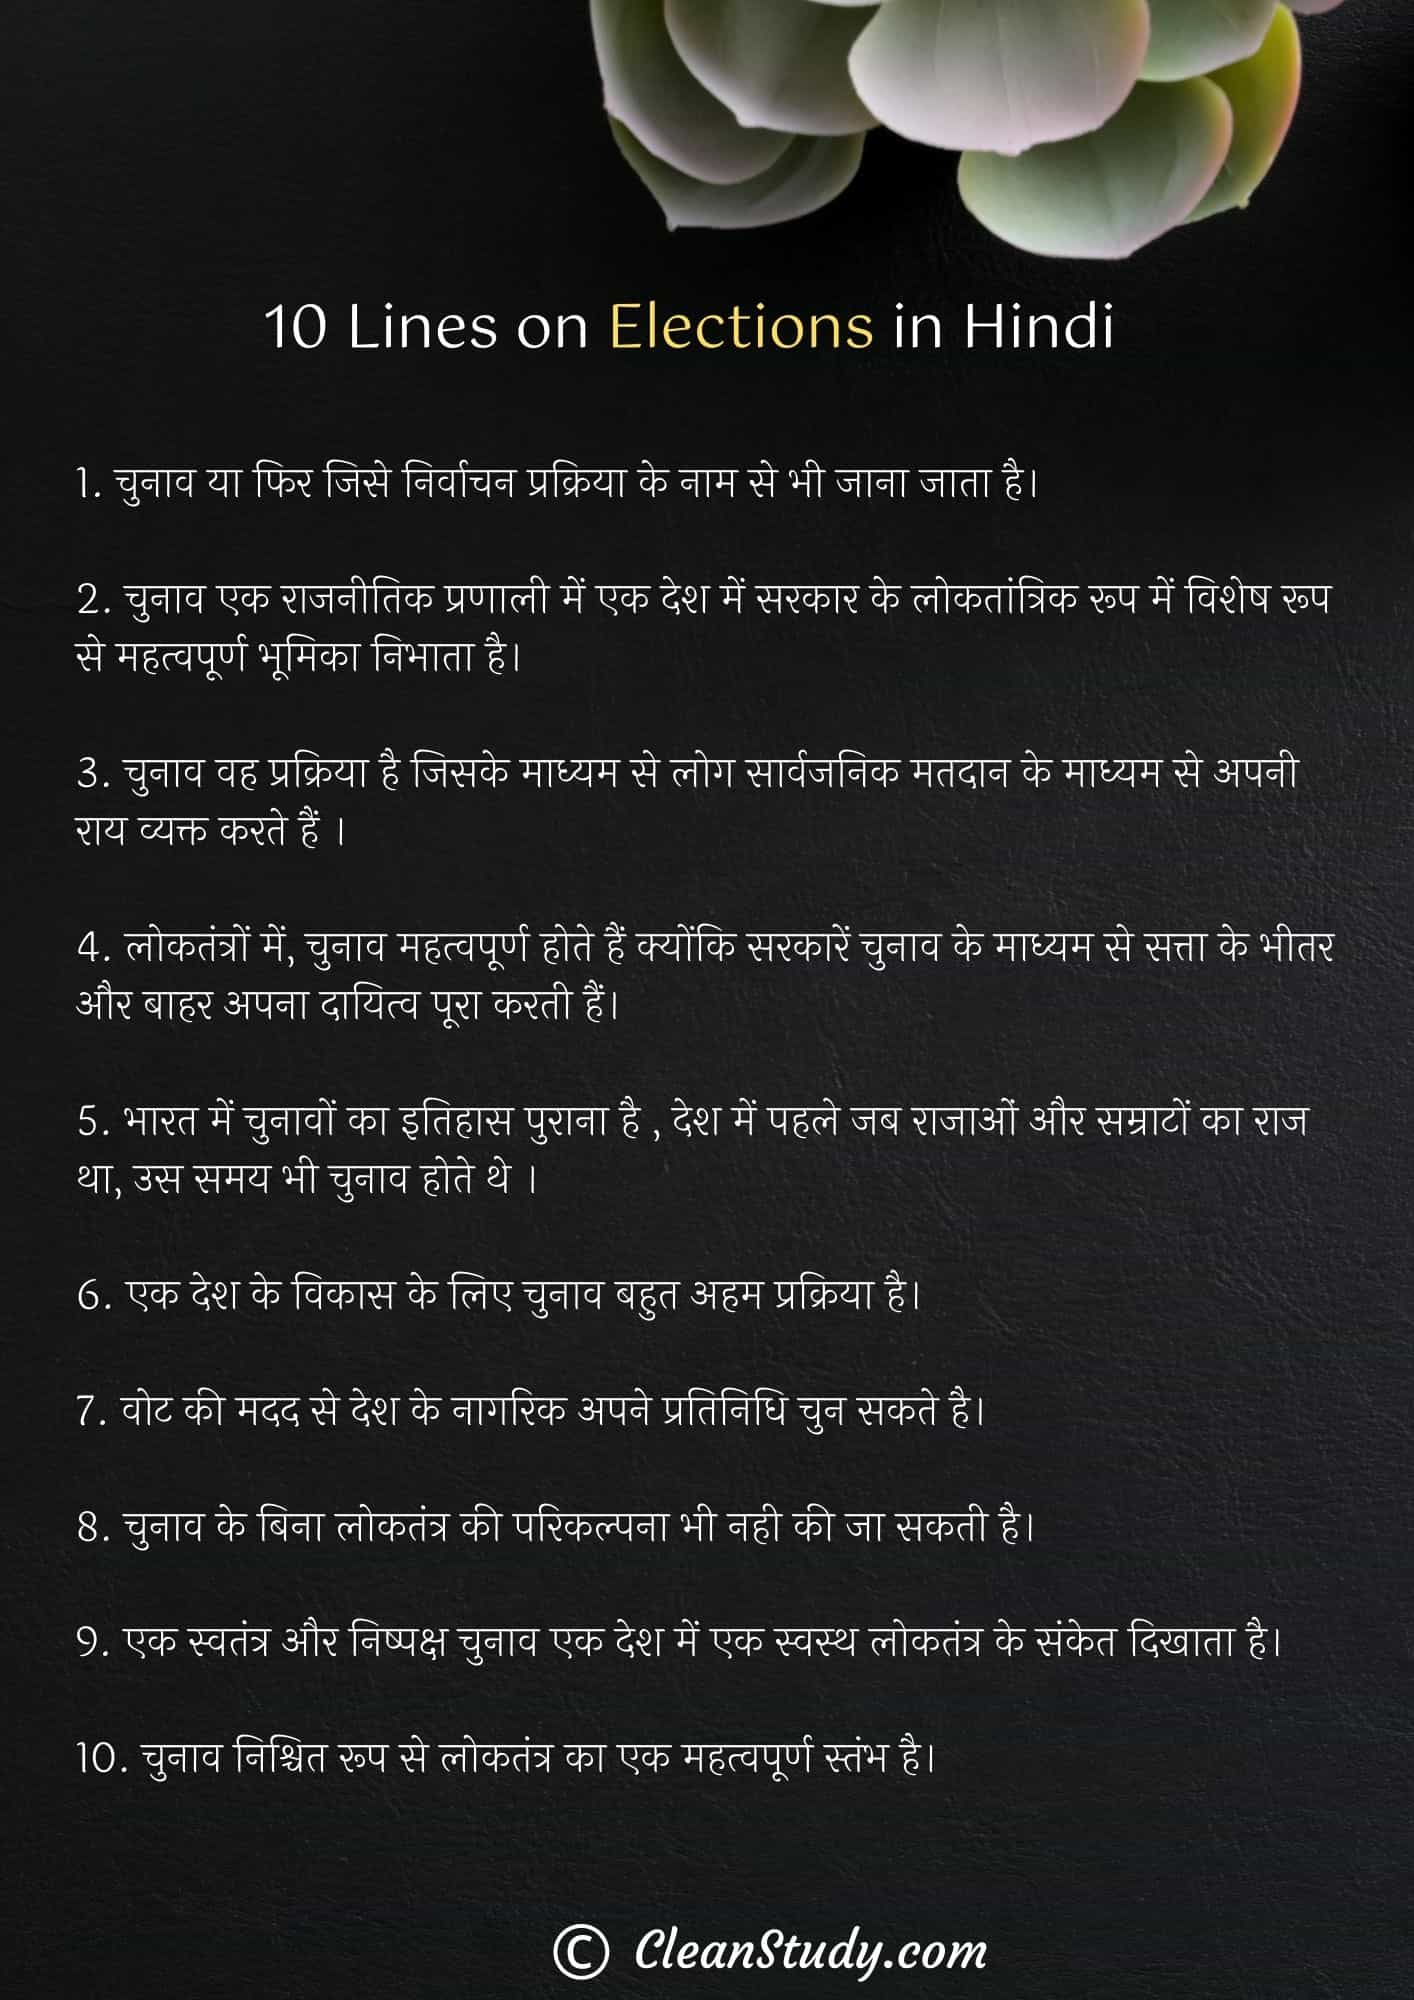 10 Lines on Importance of Elections in Hindi